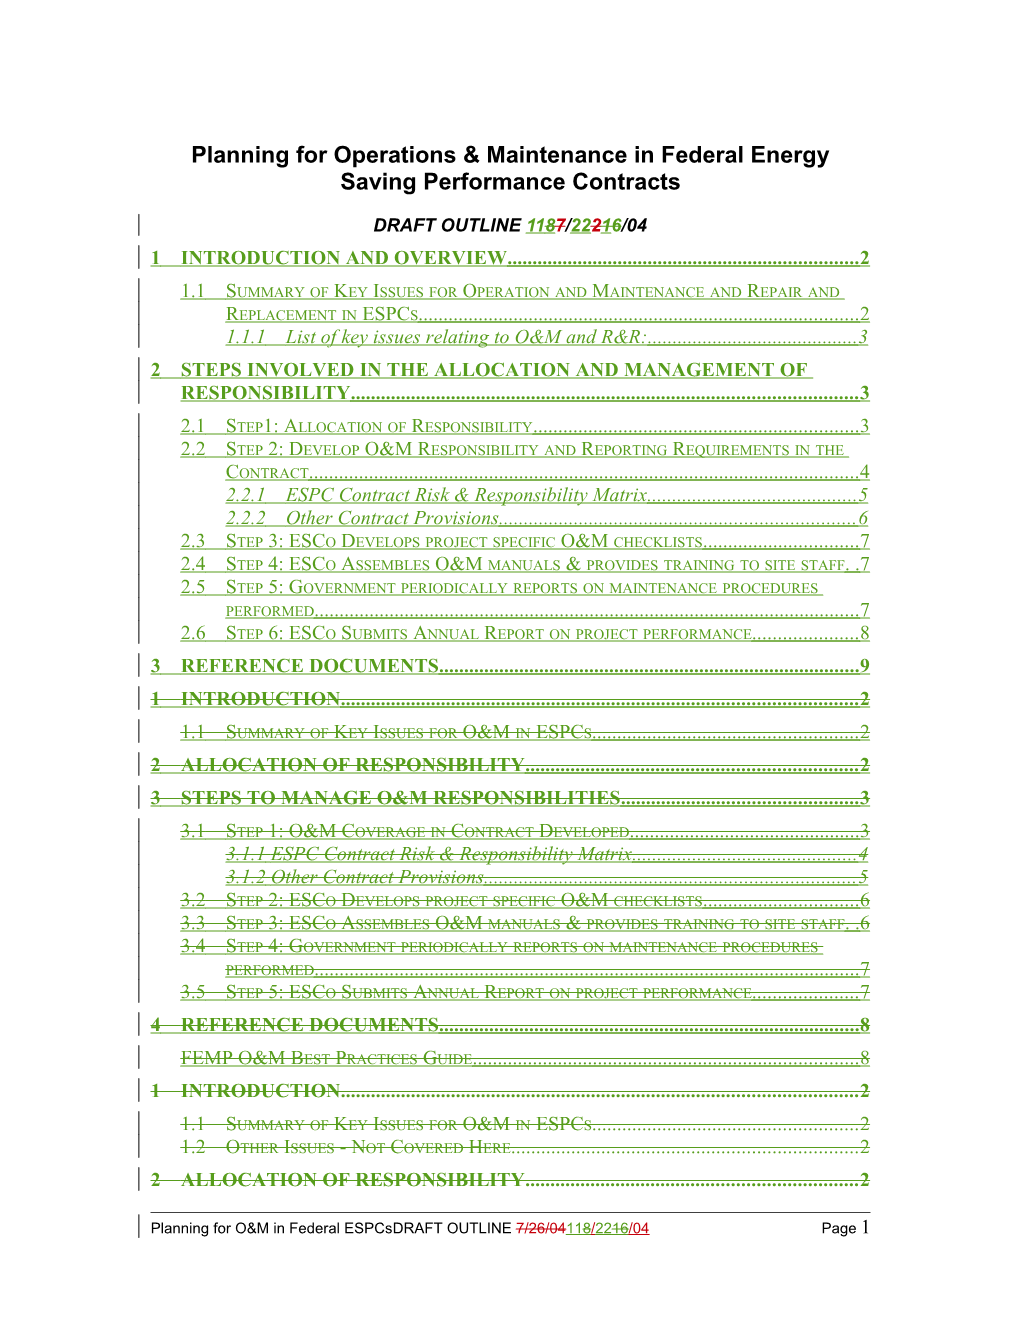 Planning for Operations & Maintenance in Federal Energy Saving Performance Contracts